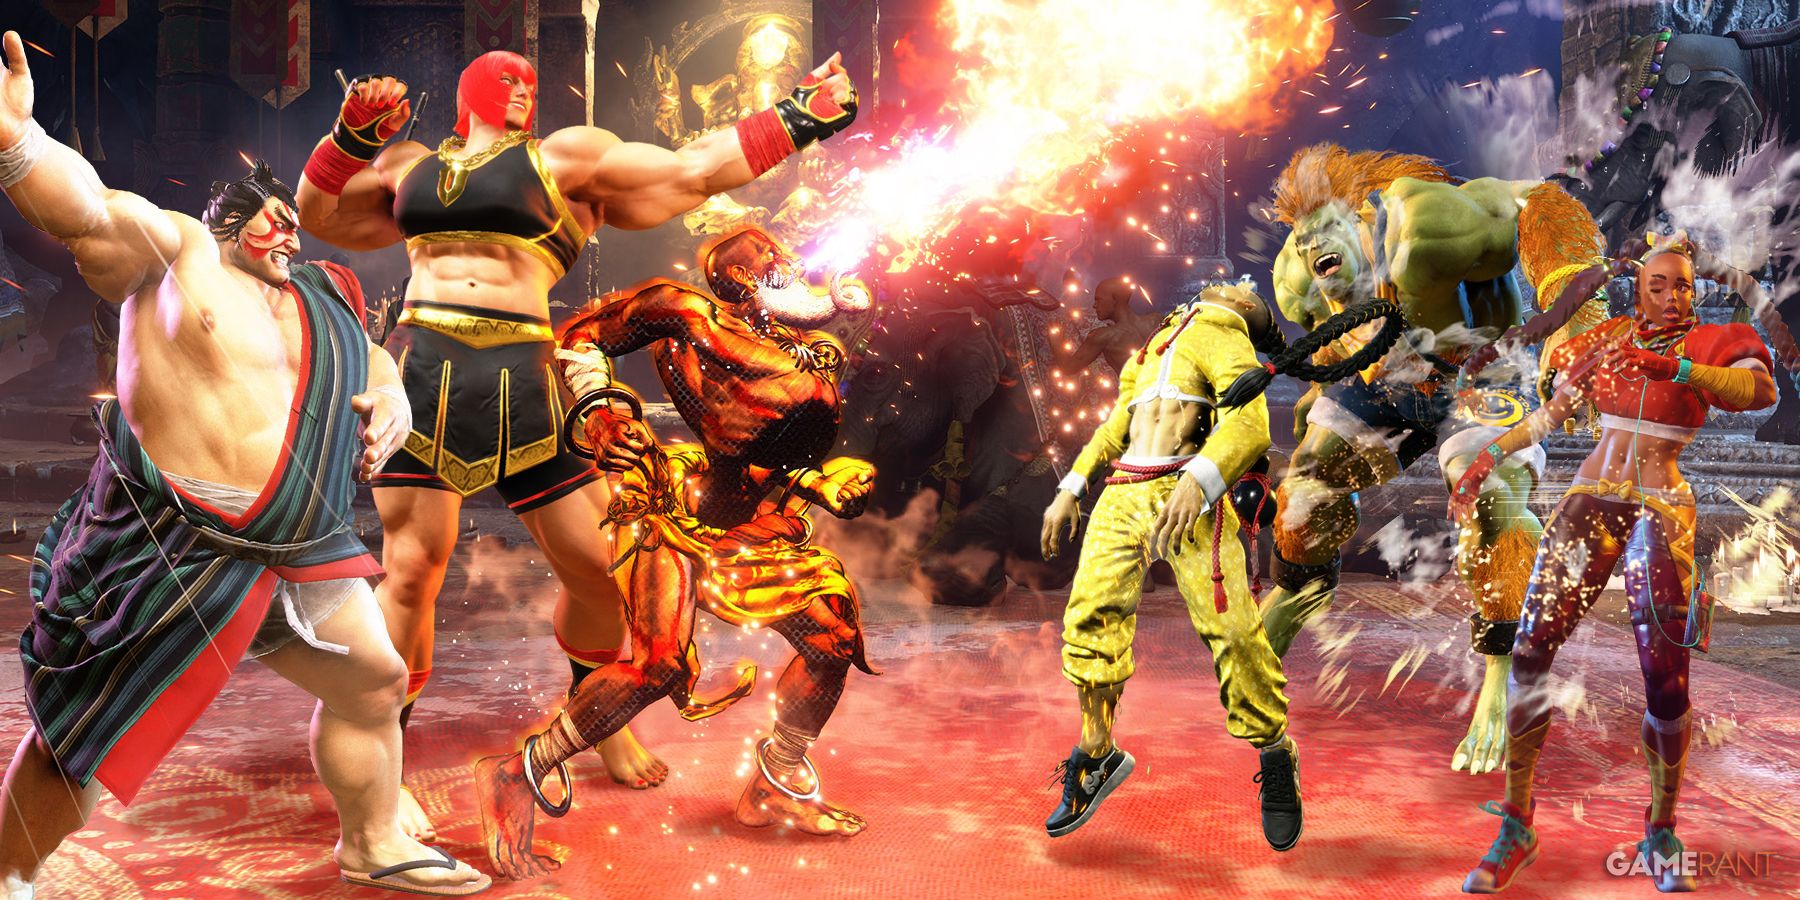 Street Fighter 5 characters: The 5 best picks to win